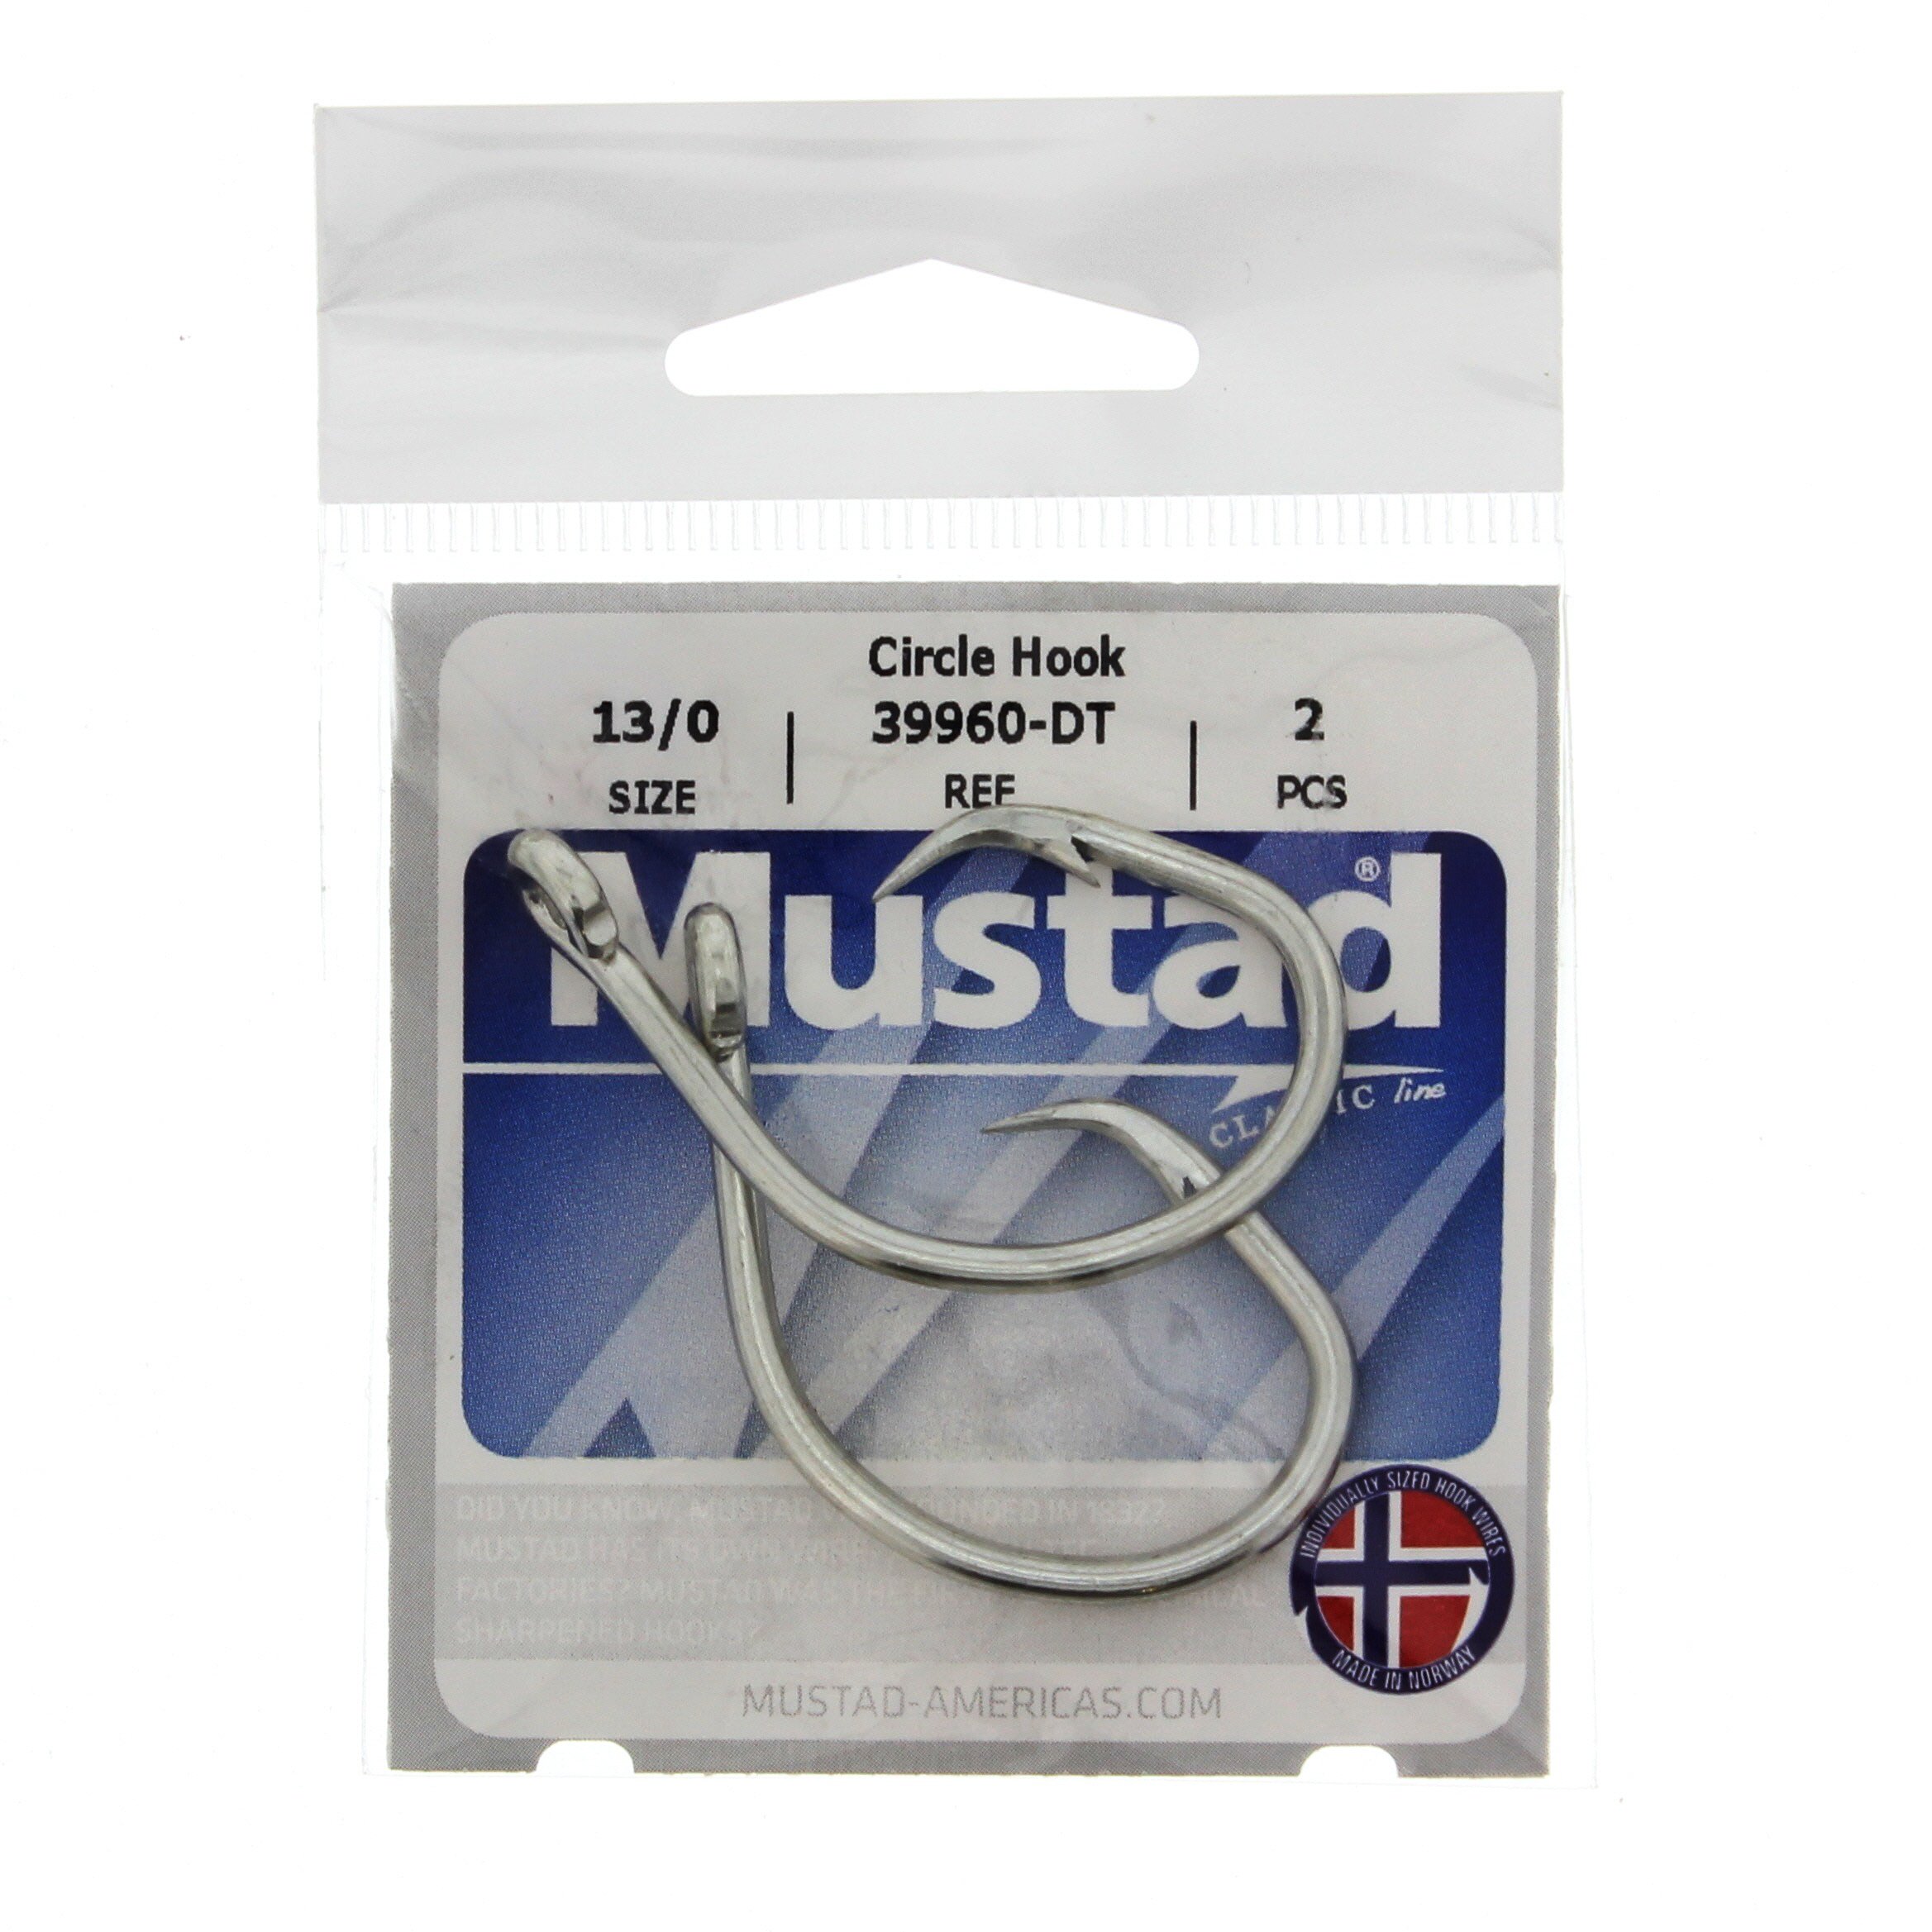 Mustad Circle Hooks 39960-DT Sizes 11/0-16/0 Choose FIXED S/H